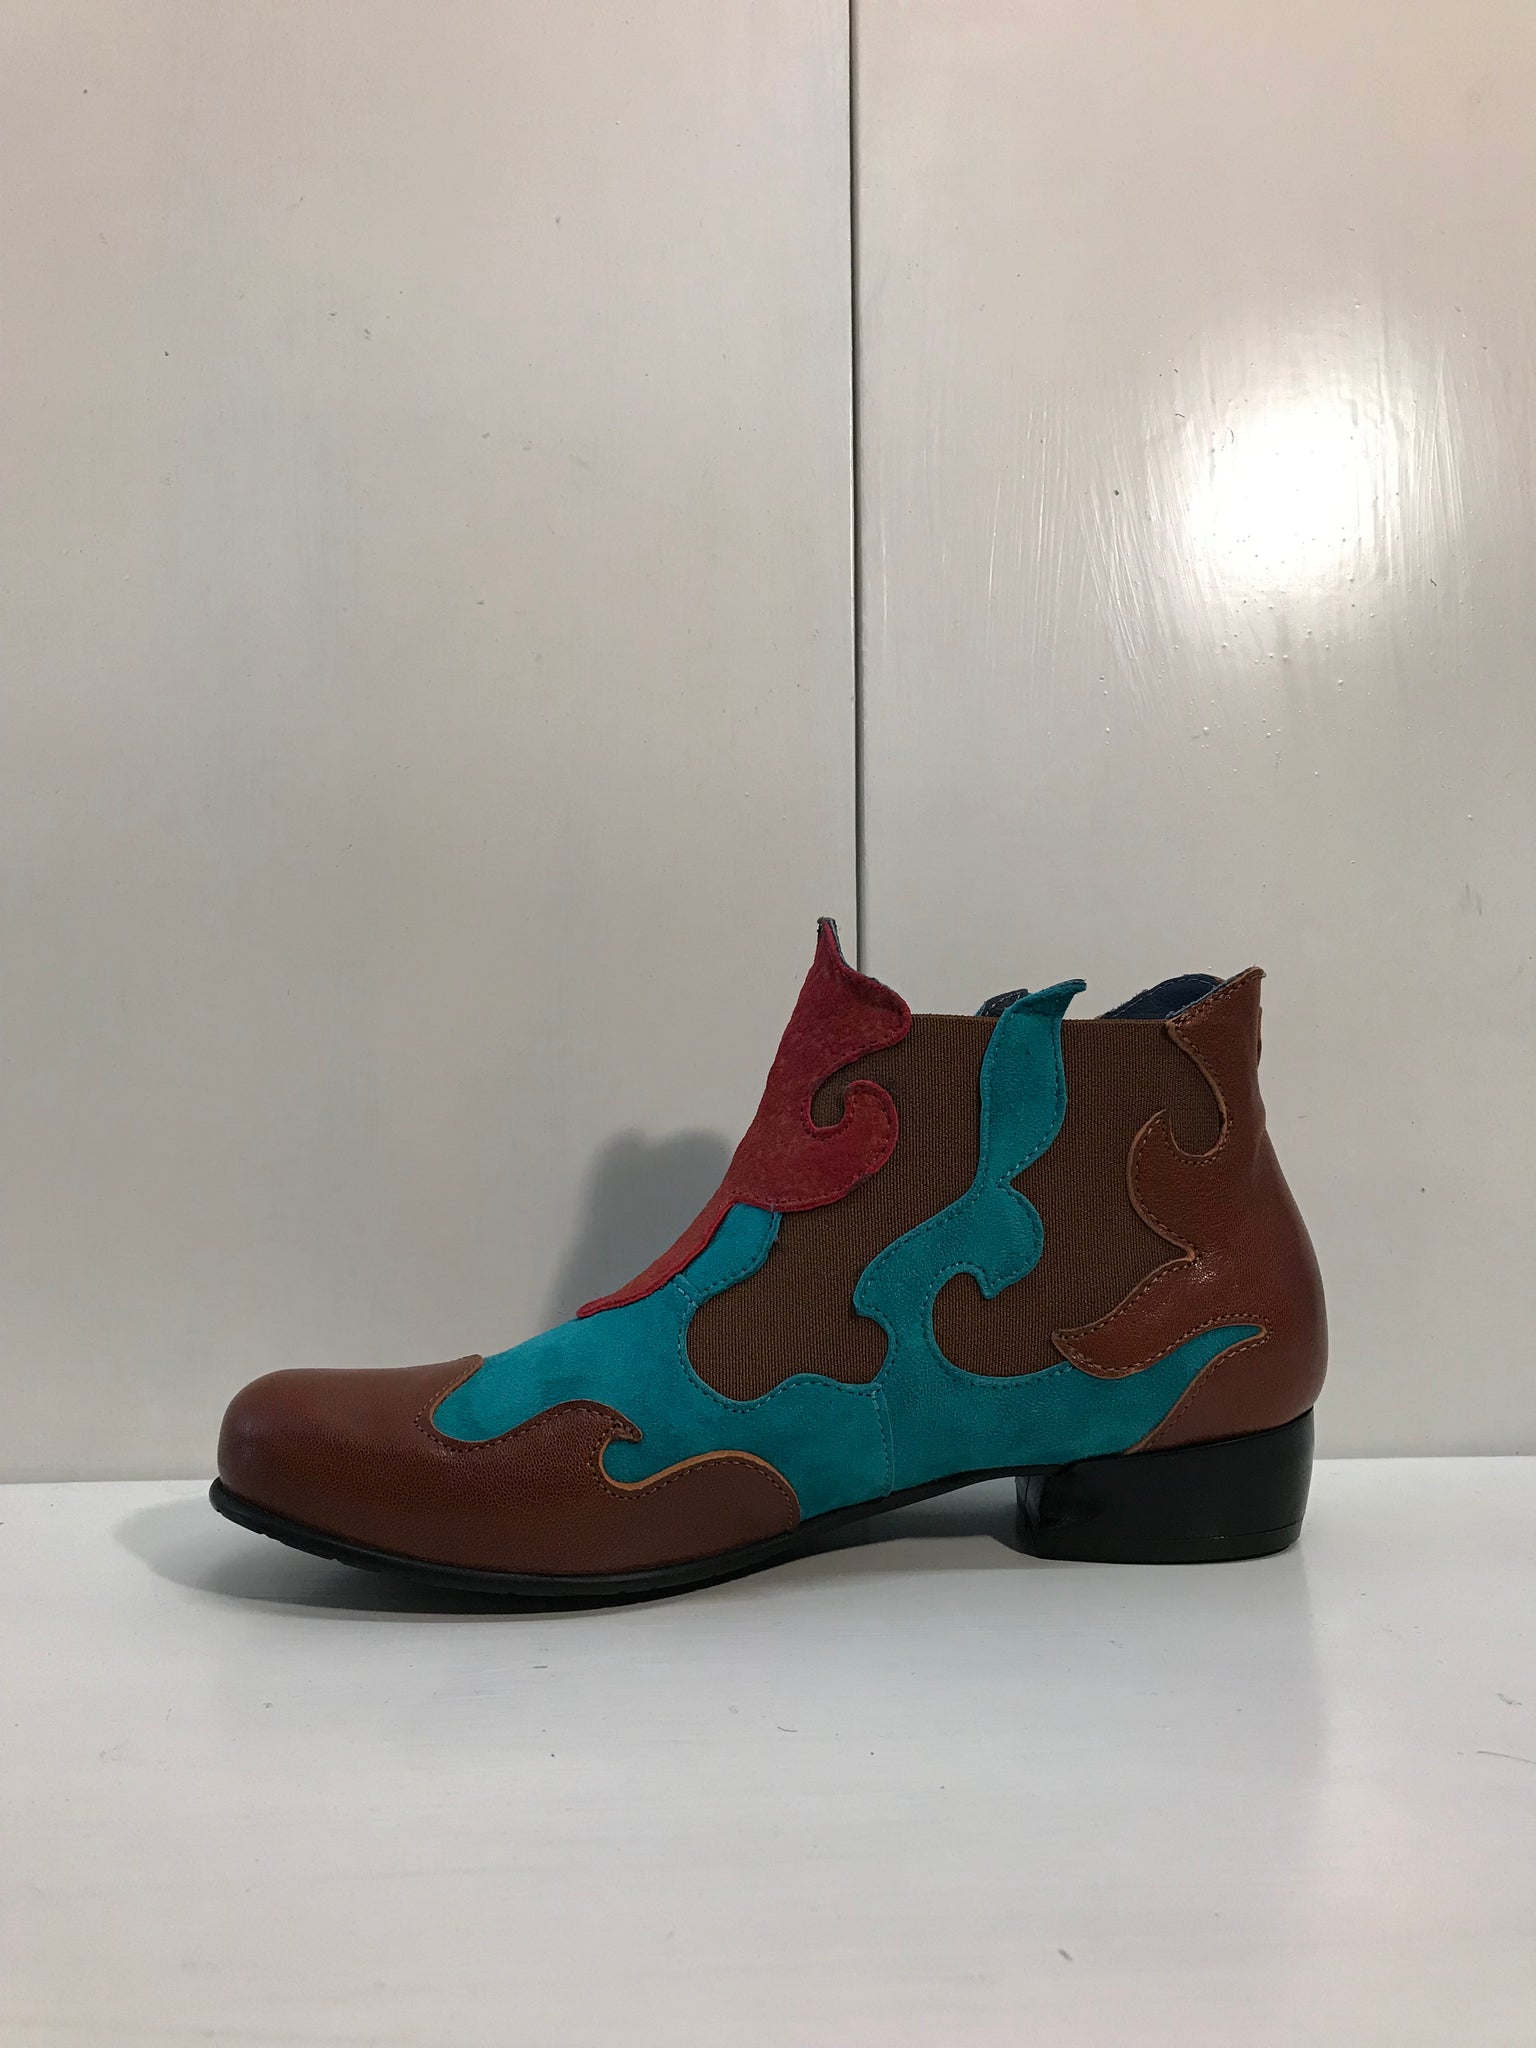 Vladi 1184 tan, turquoise, orange suede and leather Chelsea boot